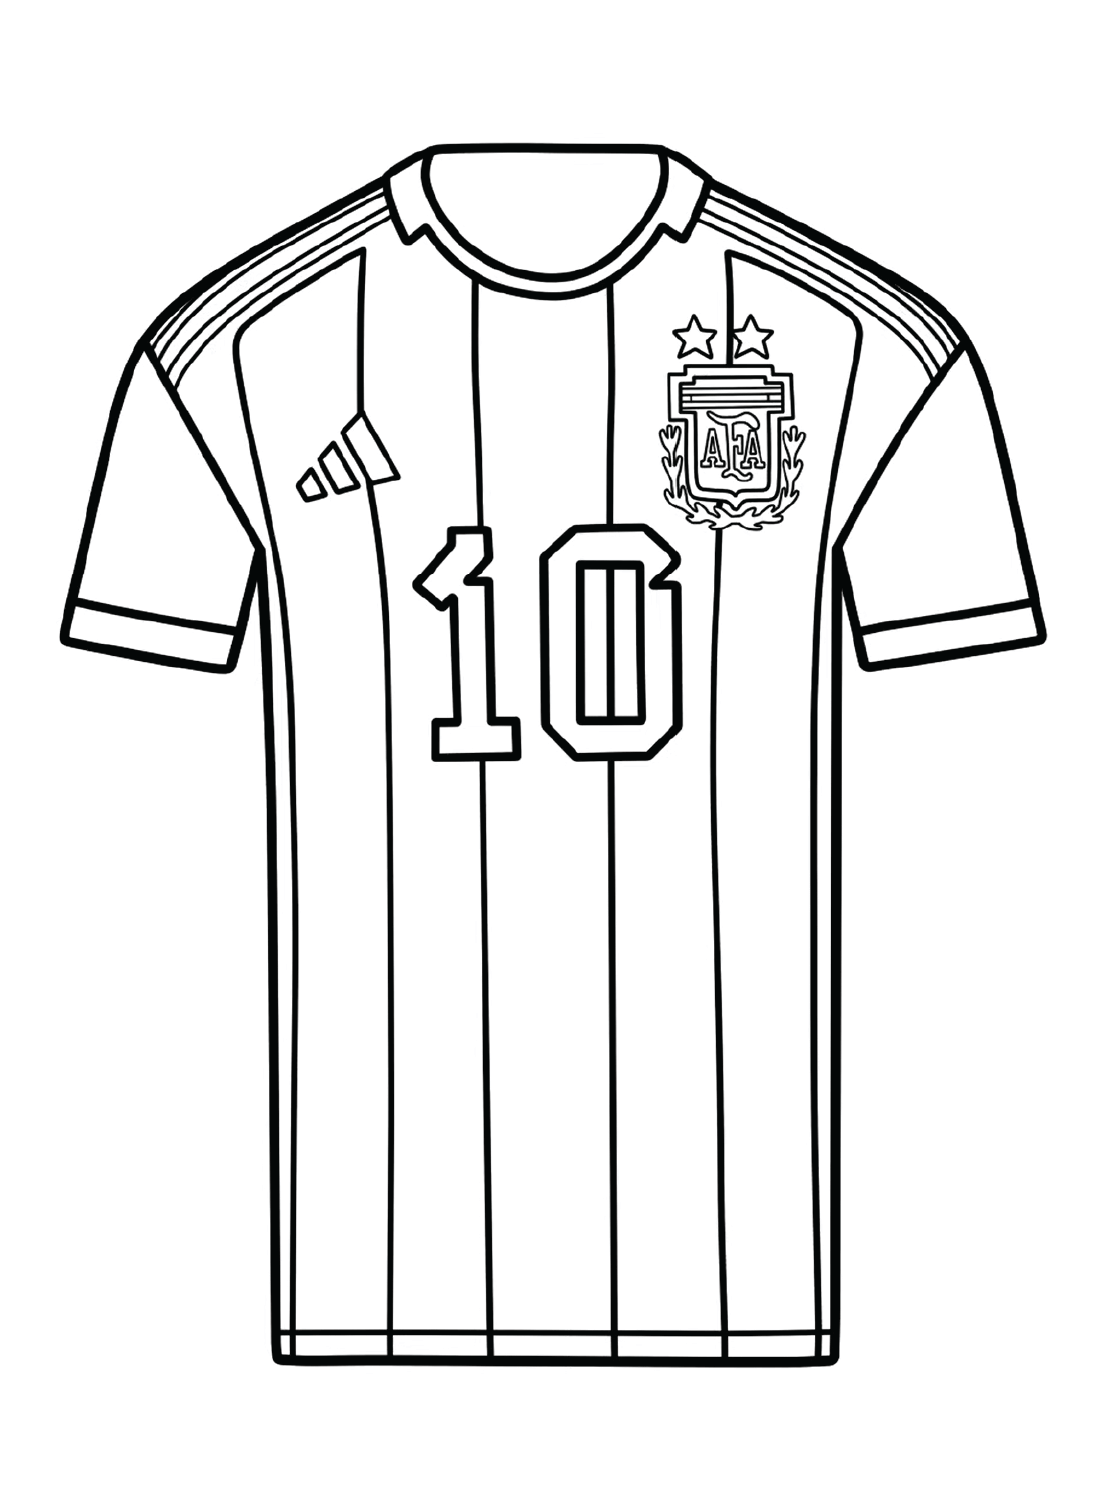 Lionel Messi Jersey Coloring Pages - Lionel Messi Coloring Pages - Coloring Pages For Kids And Adults